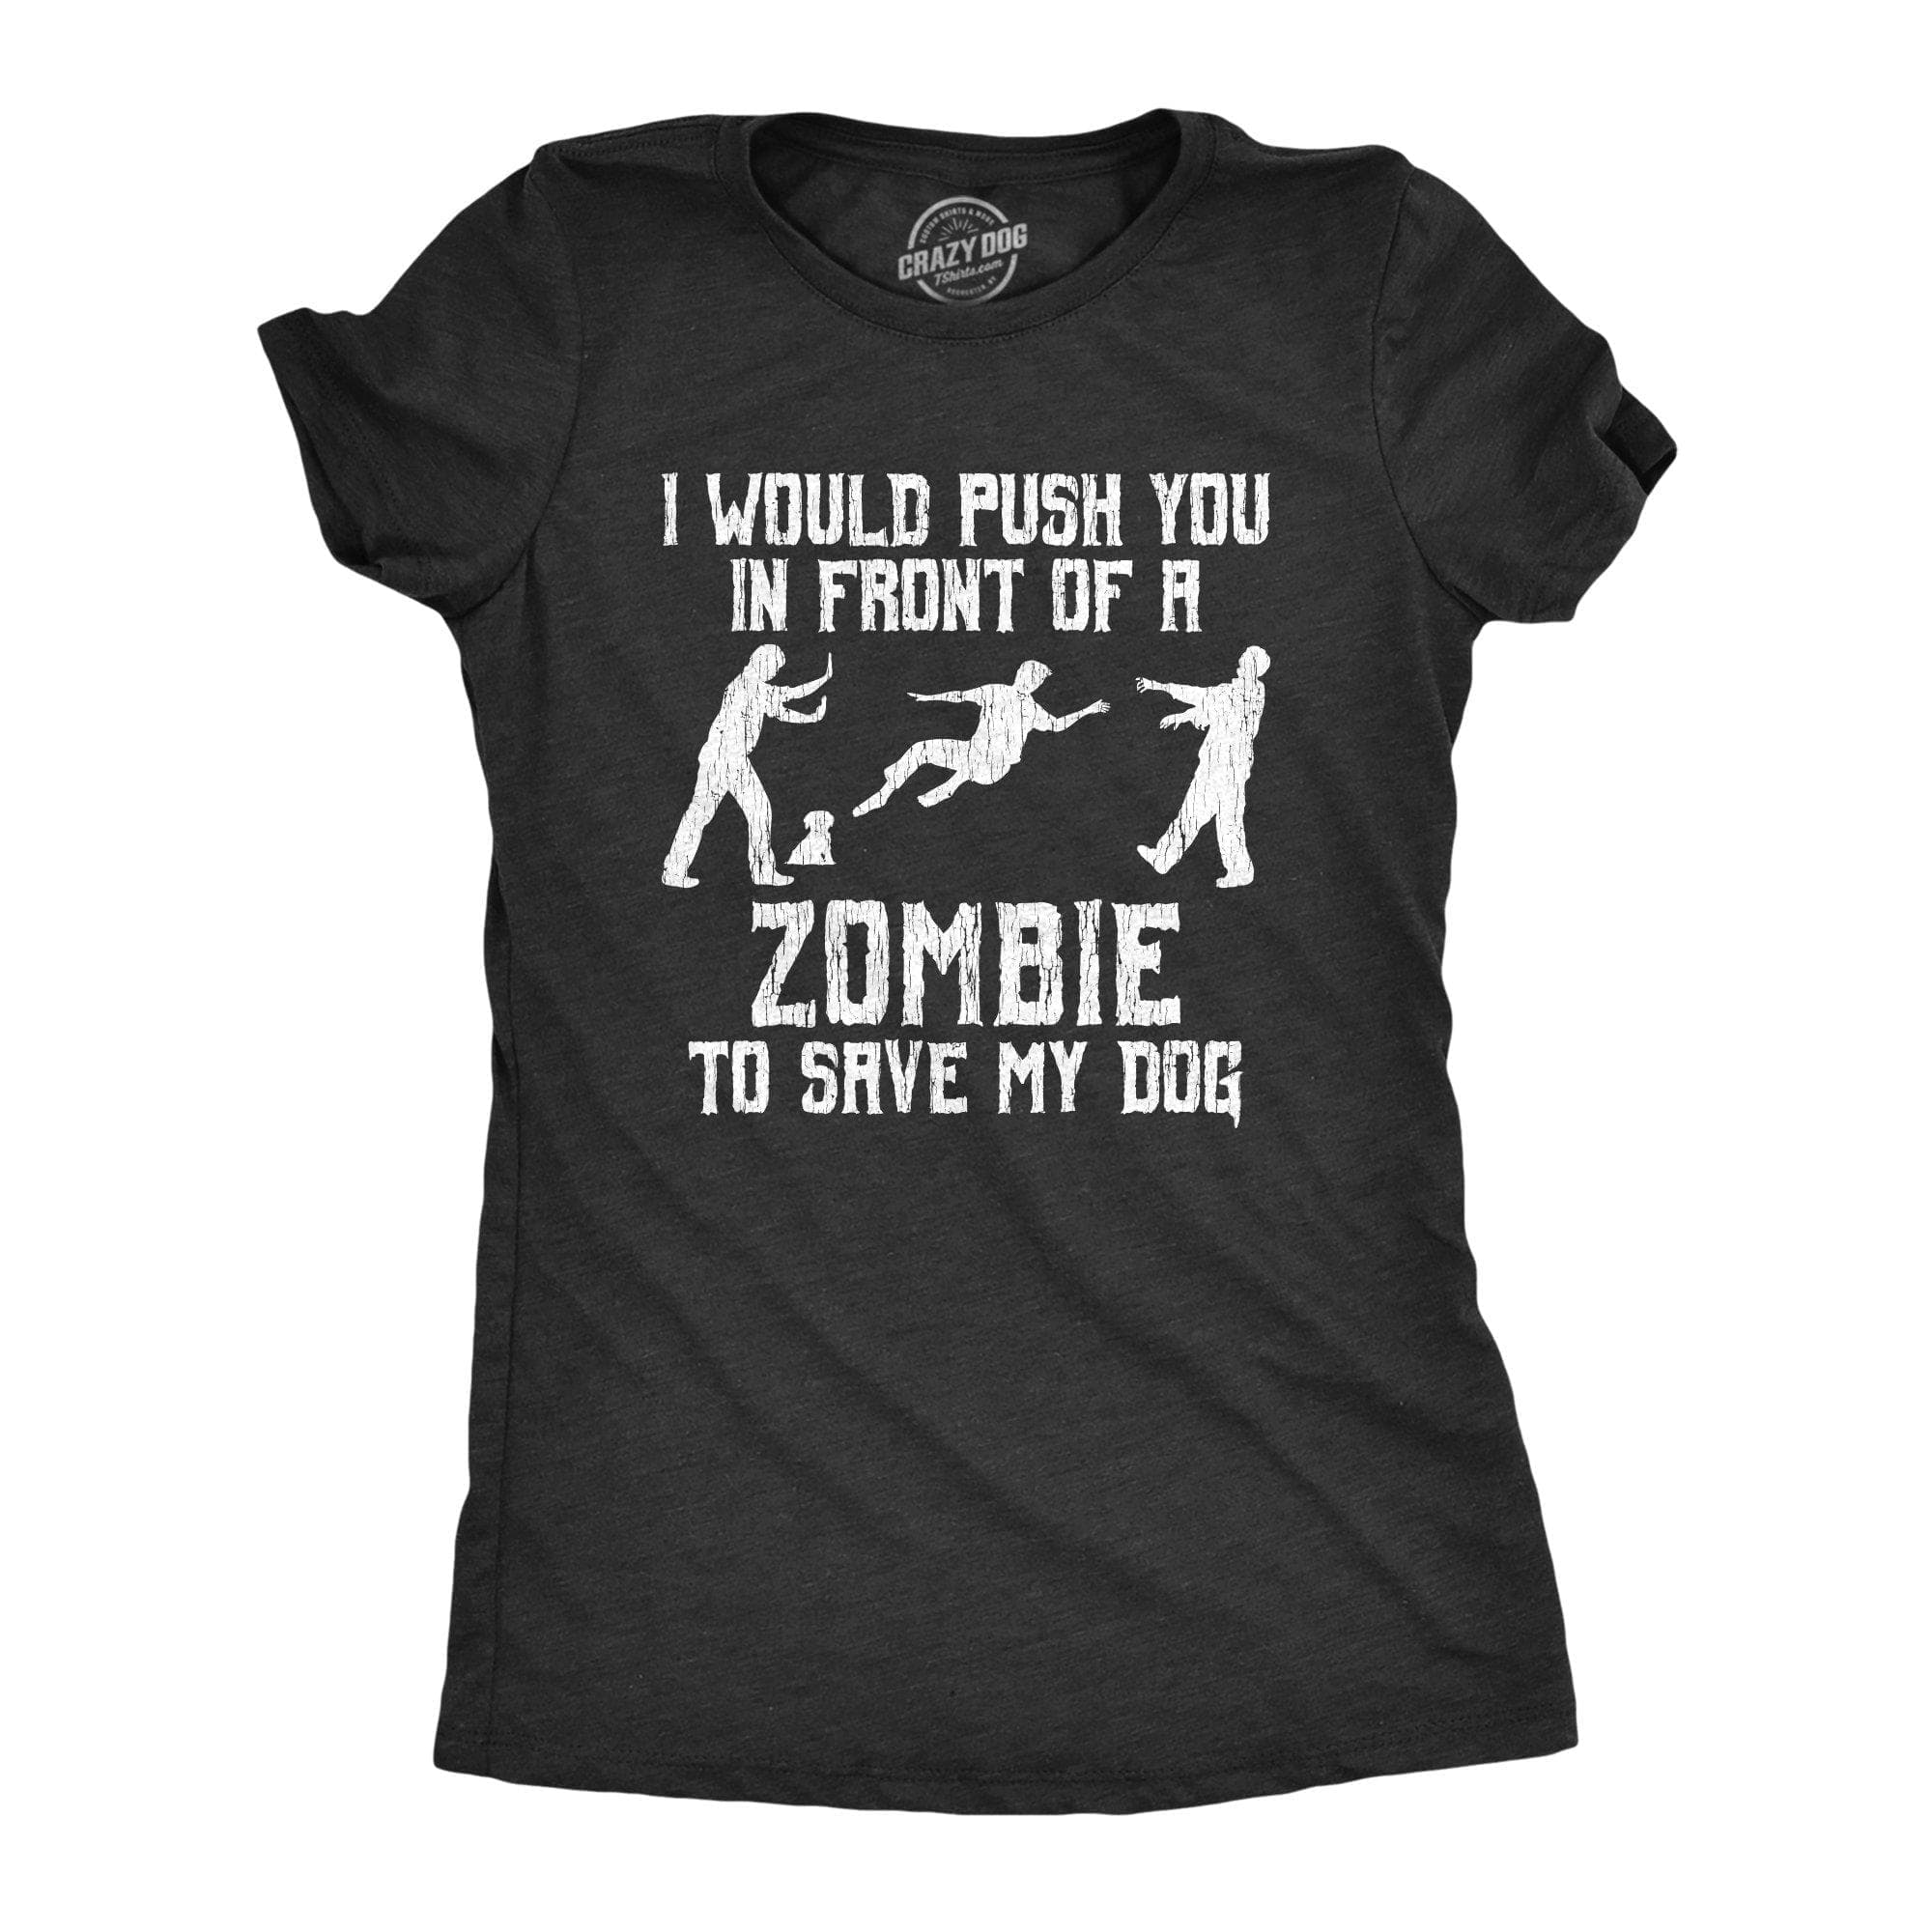 I Would Push You In Front Of A Zombie To Save My Dog Women's Tshirt - Crazy Dog T-Shirts